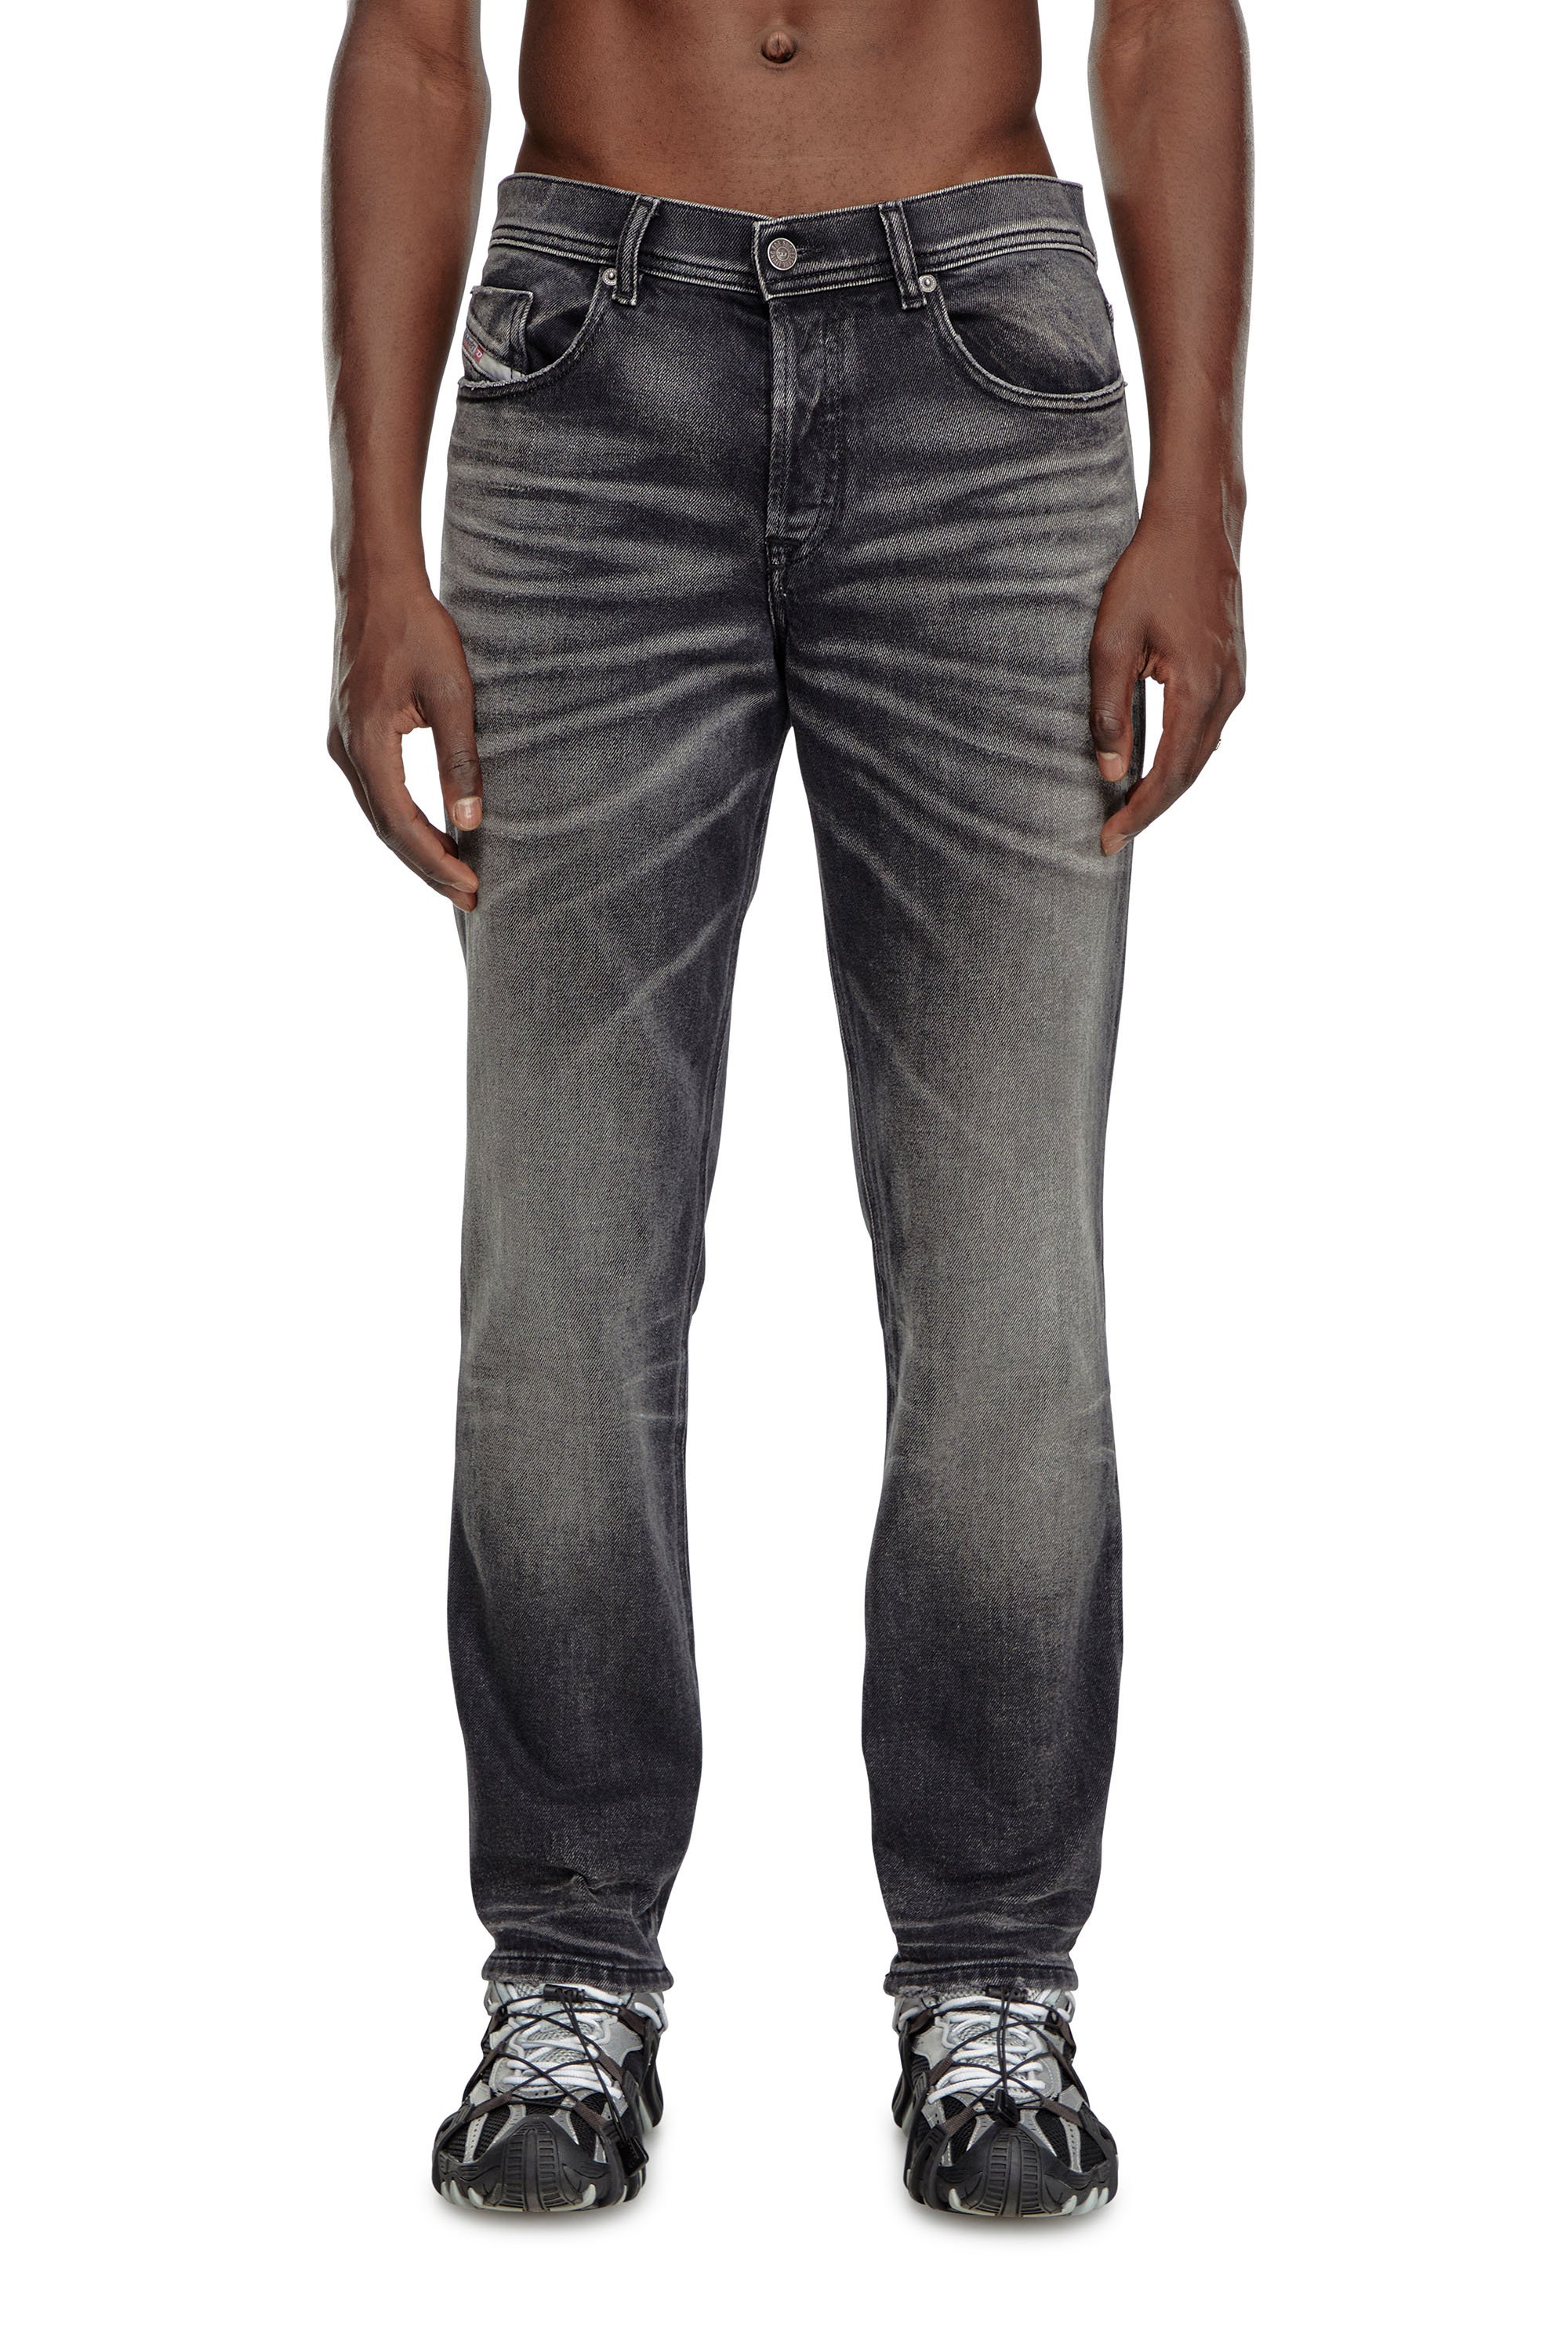 Diesel - Tapered Jeans 2023 D-Finitive 09J65, Hombre Tapered Jeans - 2023 D-Finitive in Negro - Image 2